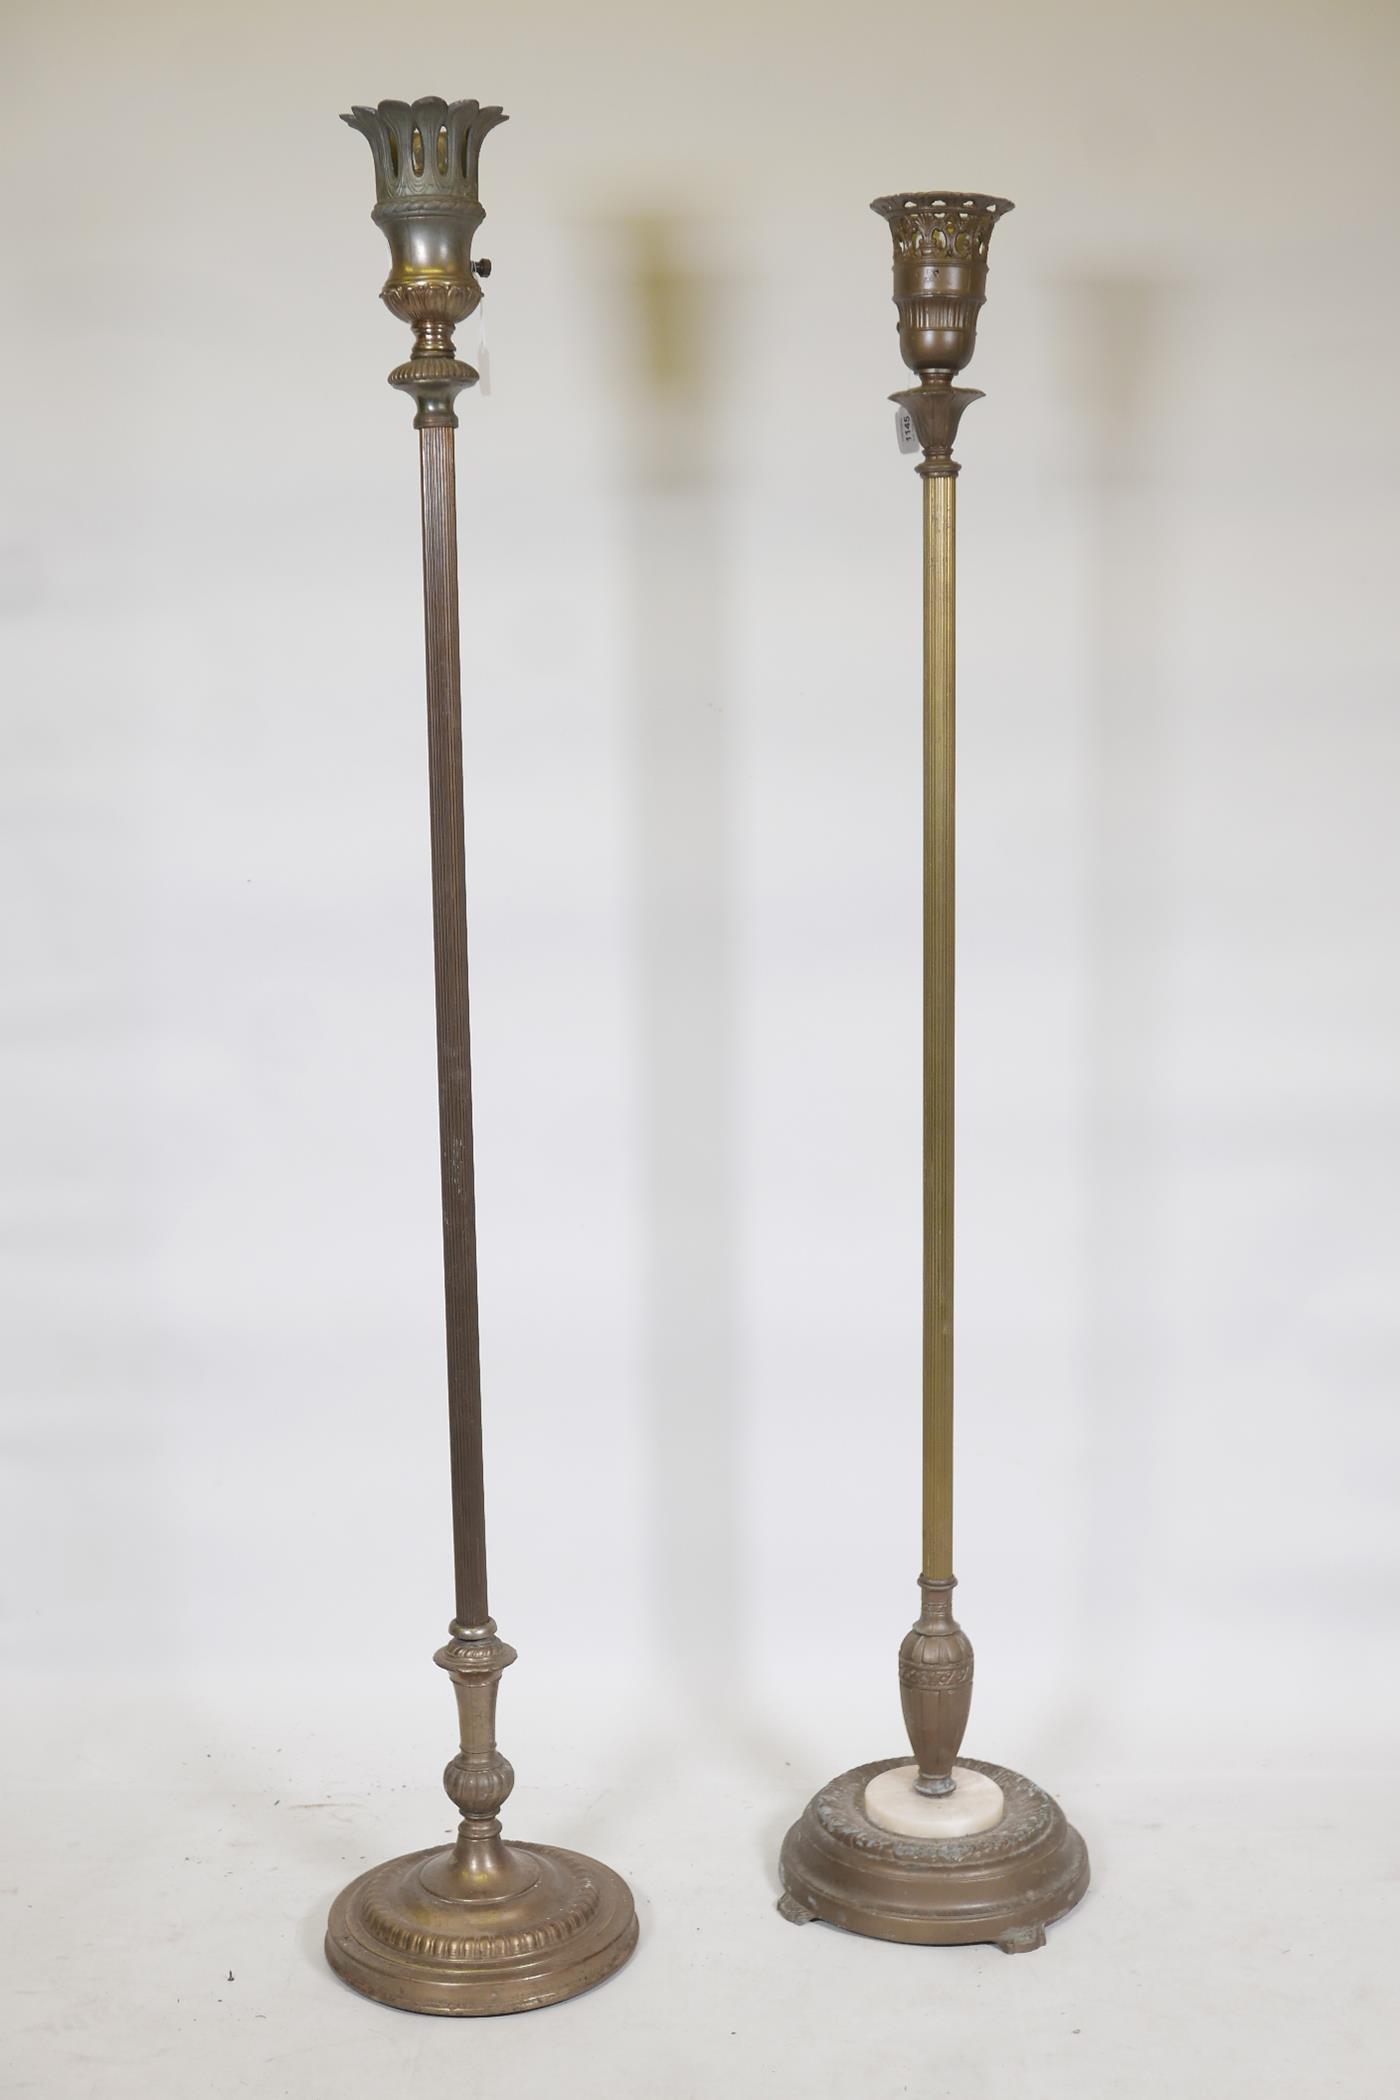 A brass floor lamp/uplighter, and another similar, 61" high